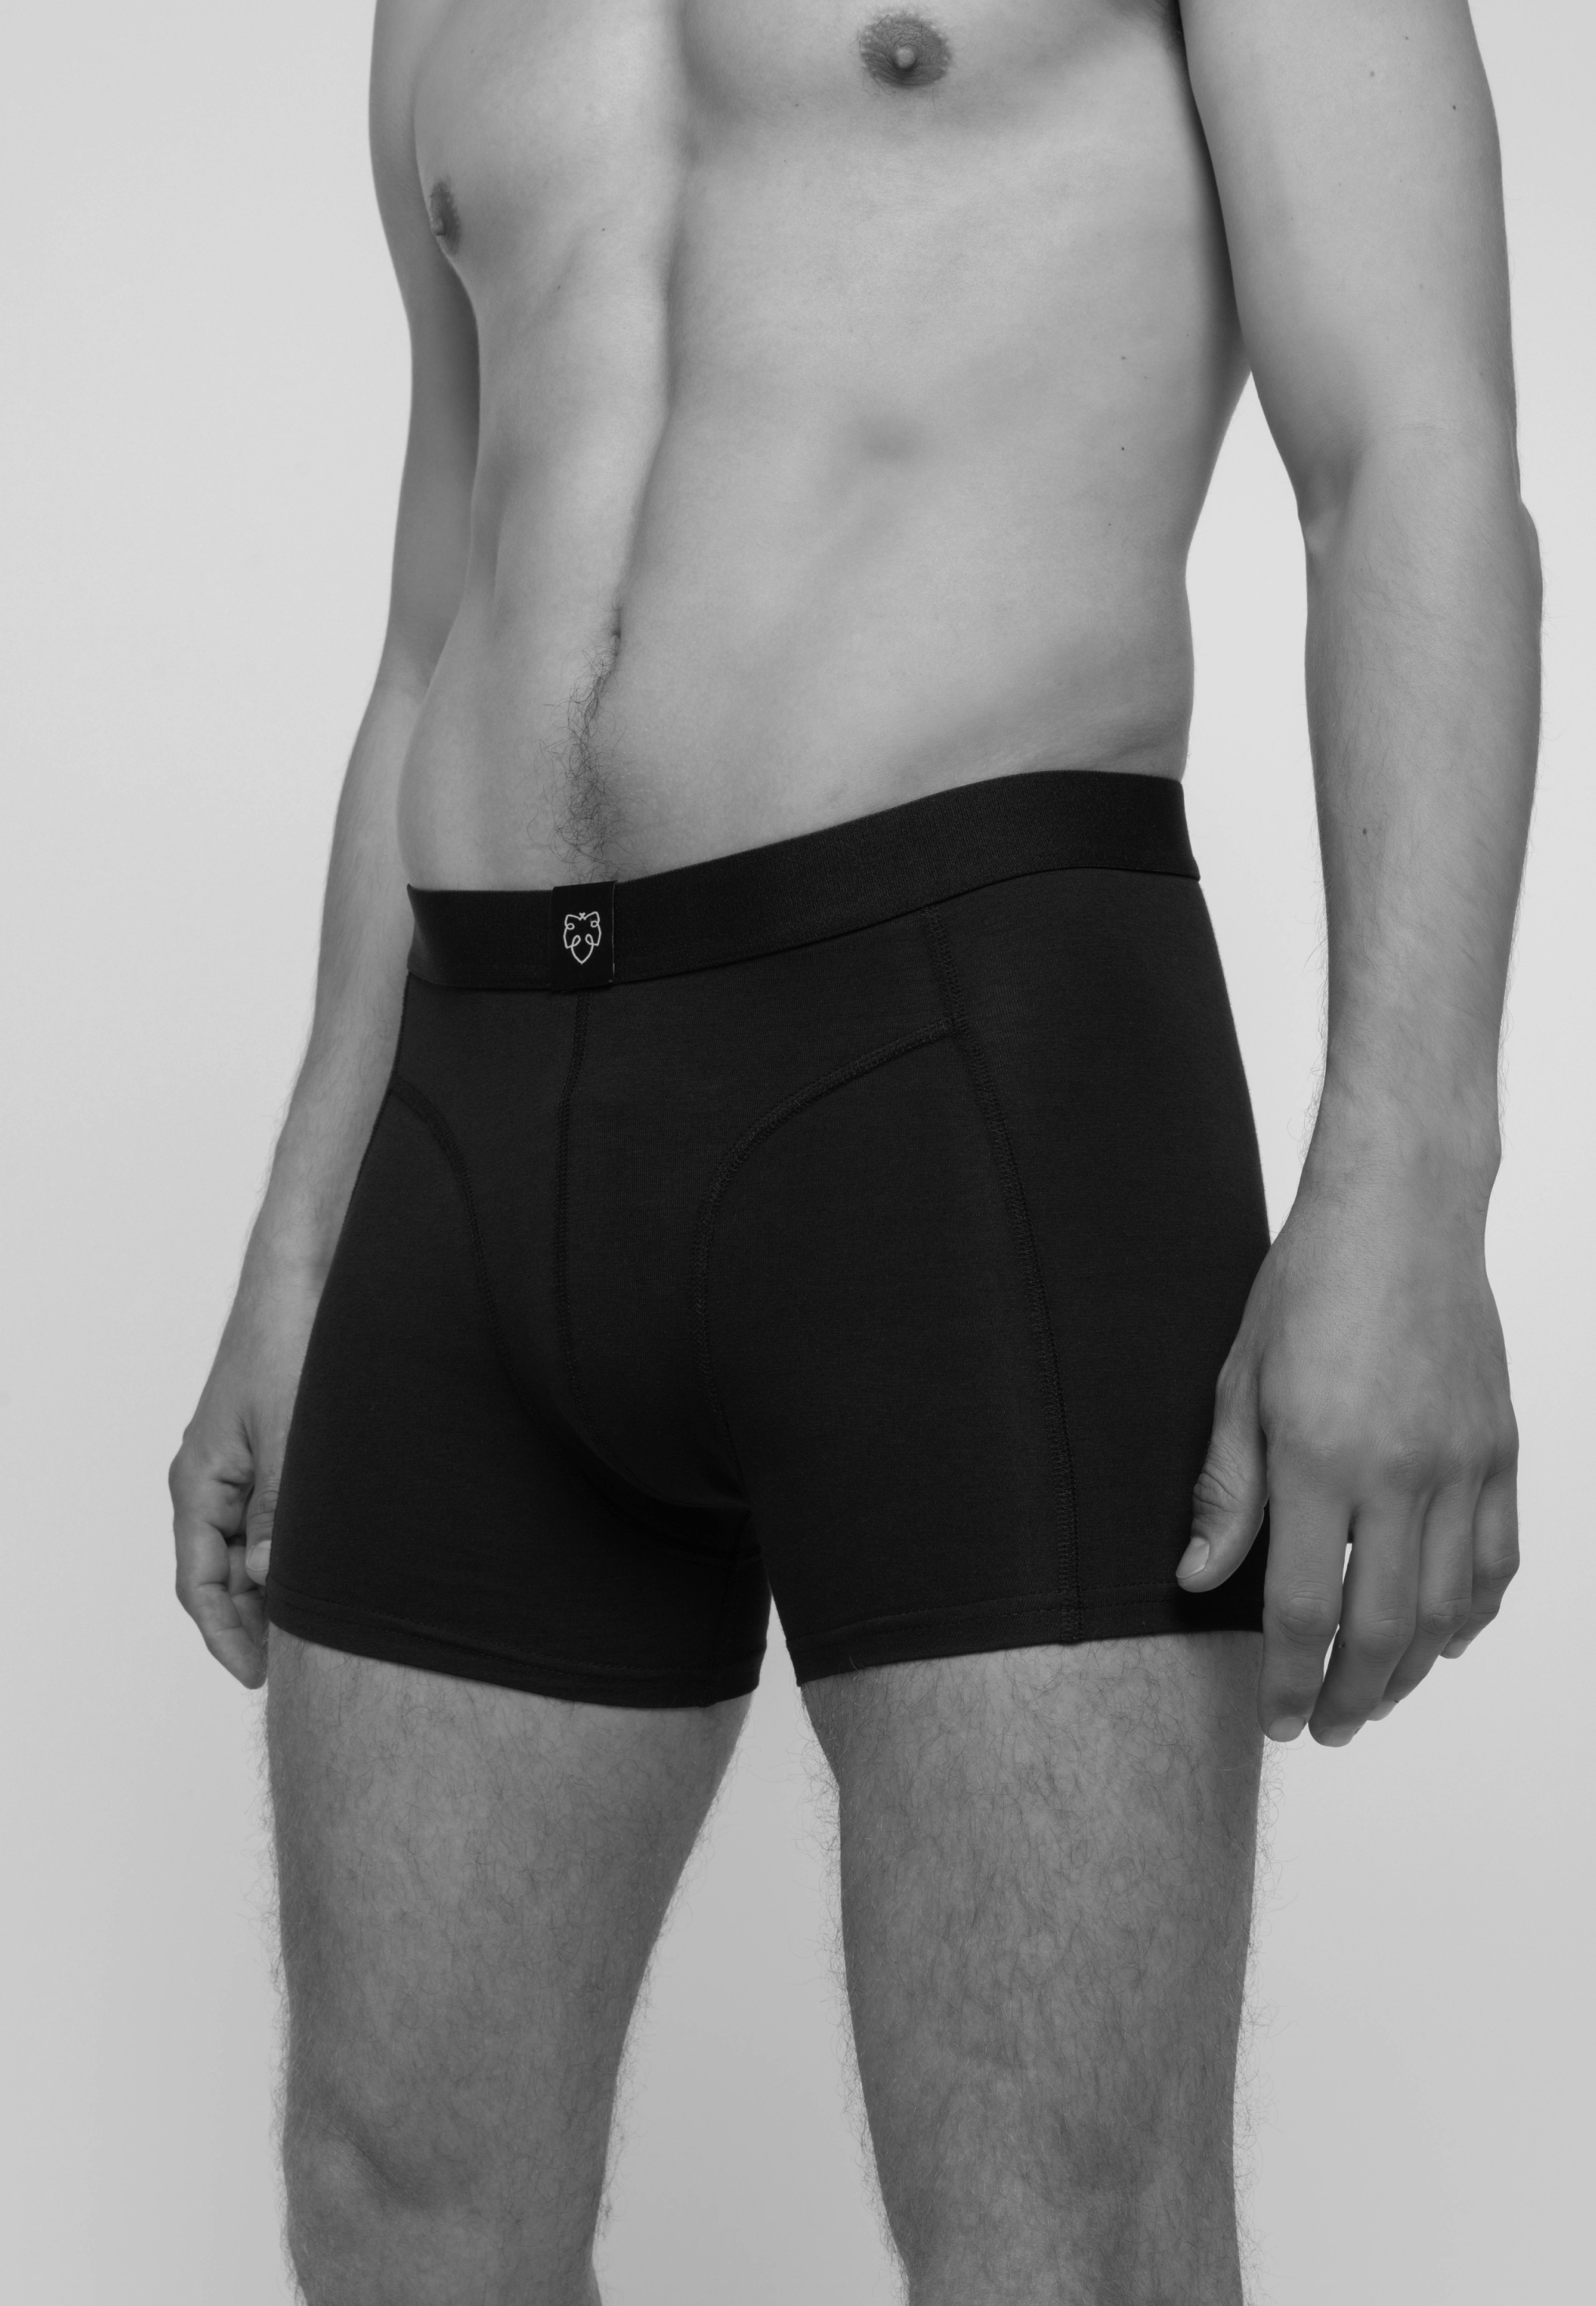 A-dam solid black boxer briefs from GOTS organic cotton